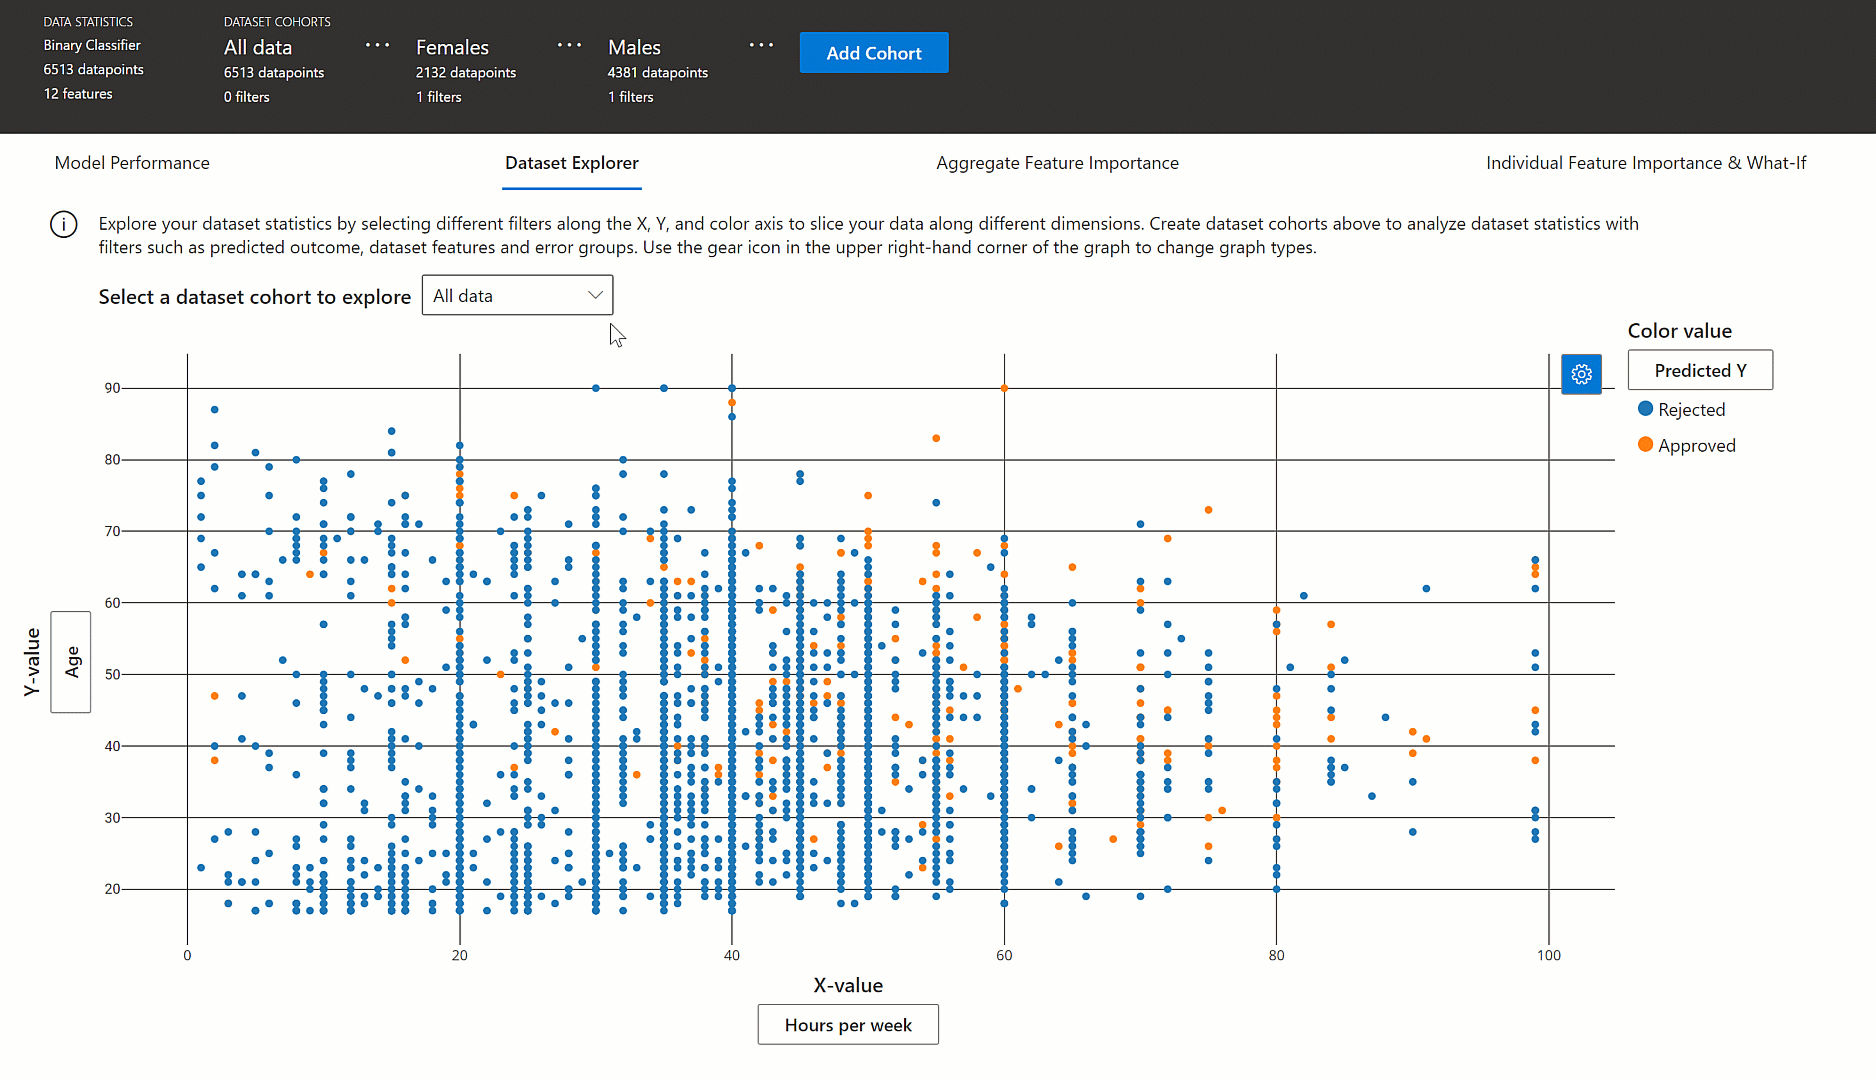 Dataset explorer tab in the explanation visualization